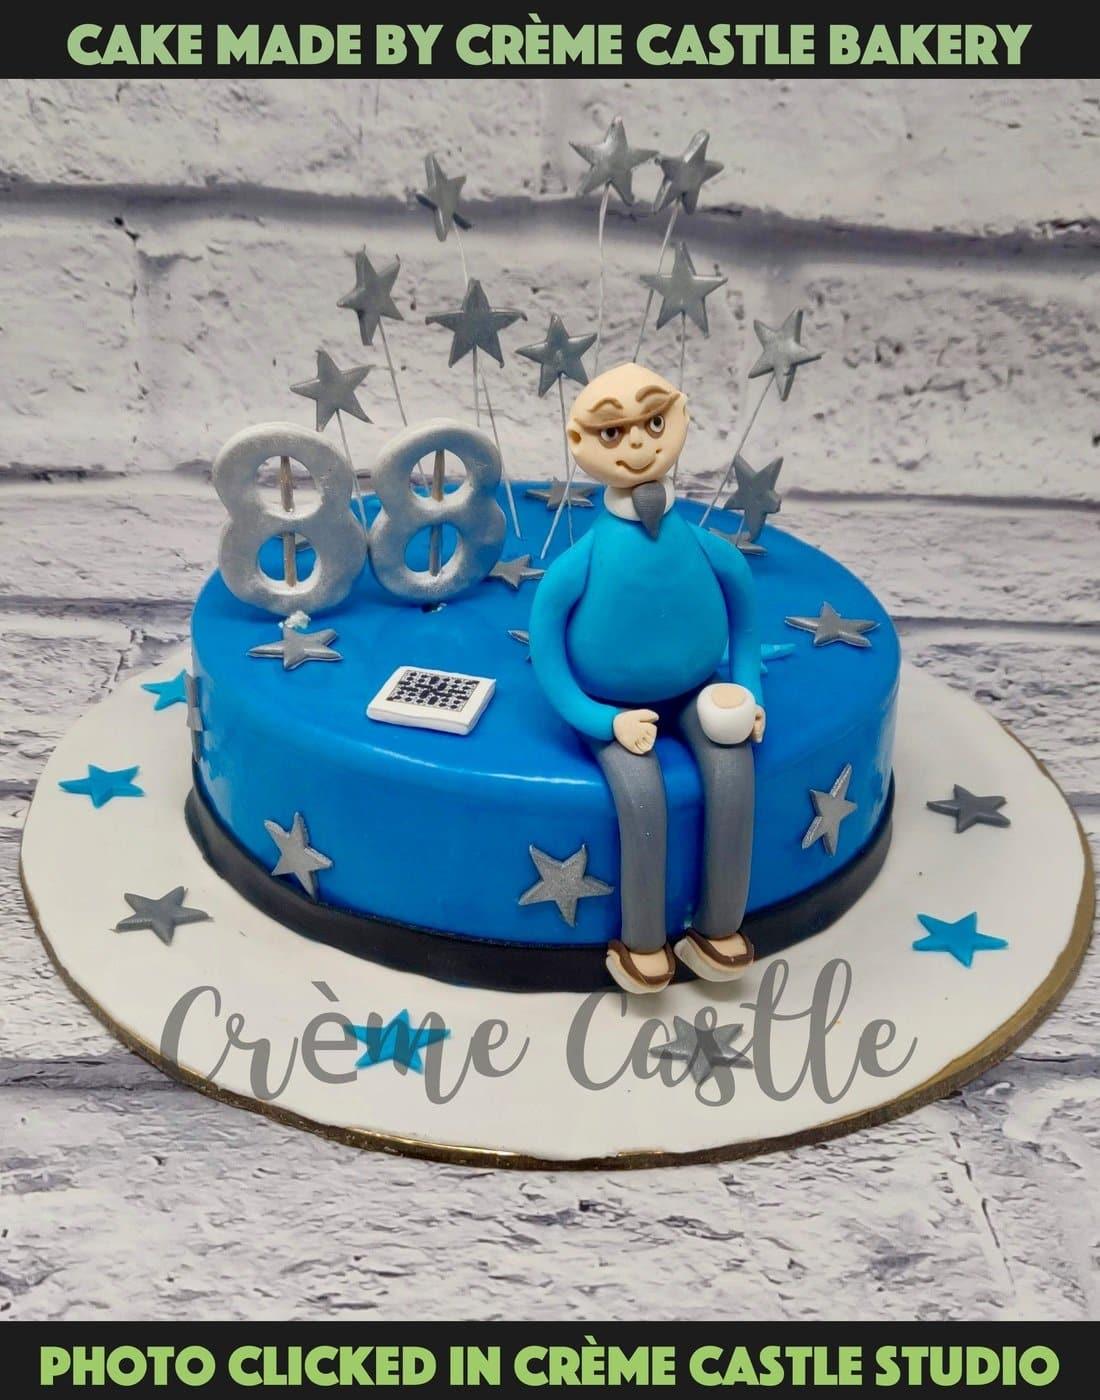 Sugar Cloud Cakes - Cake Designer, Nantwich, Crewe, Cheshire | An 80th  Birthday Cake for Robert, Rookery Hall, Nantwich